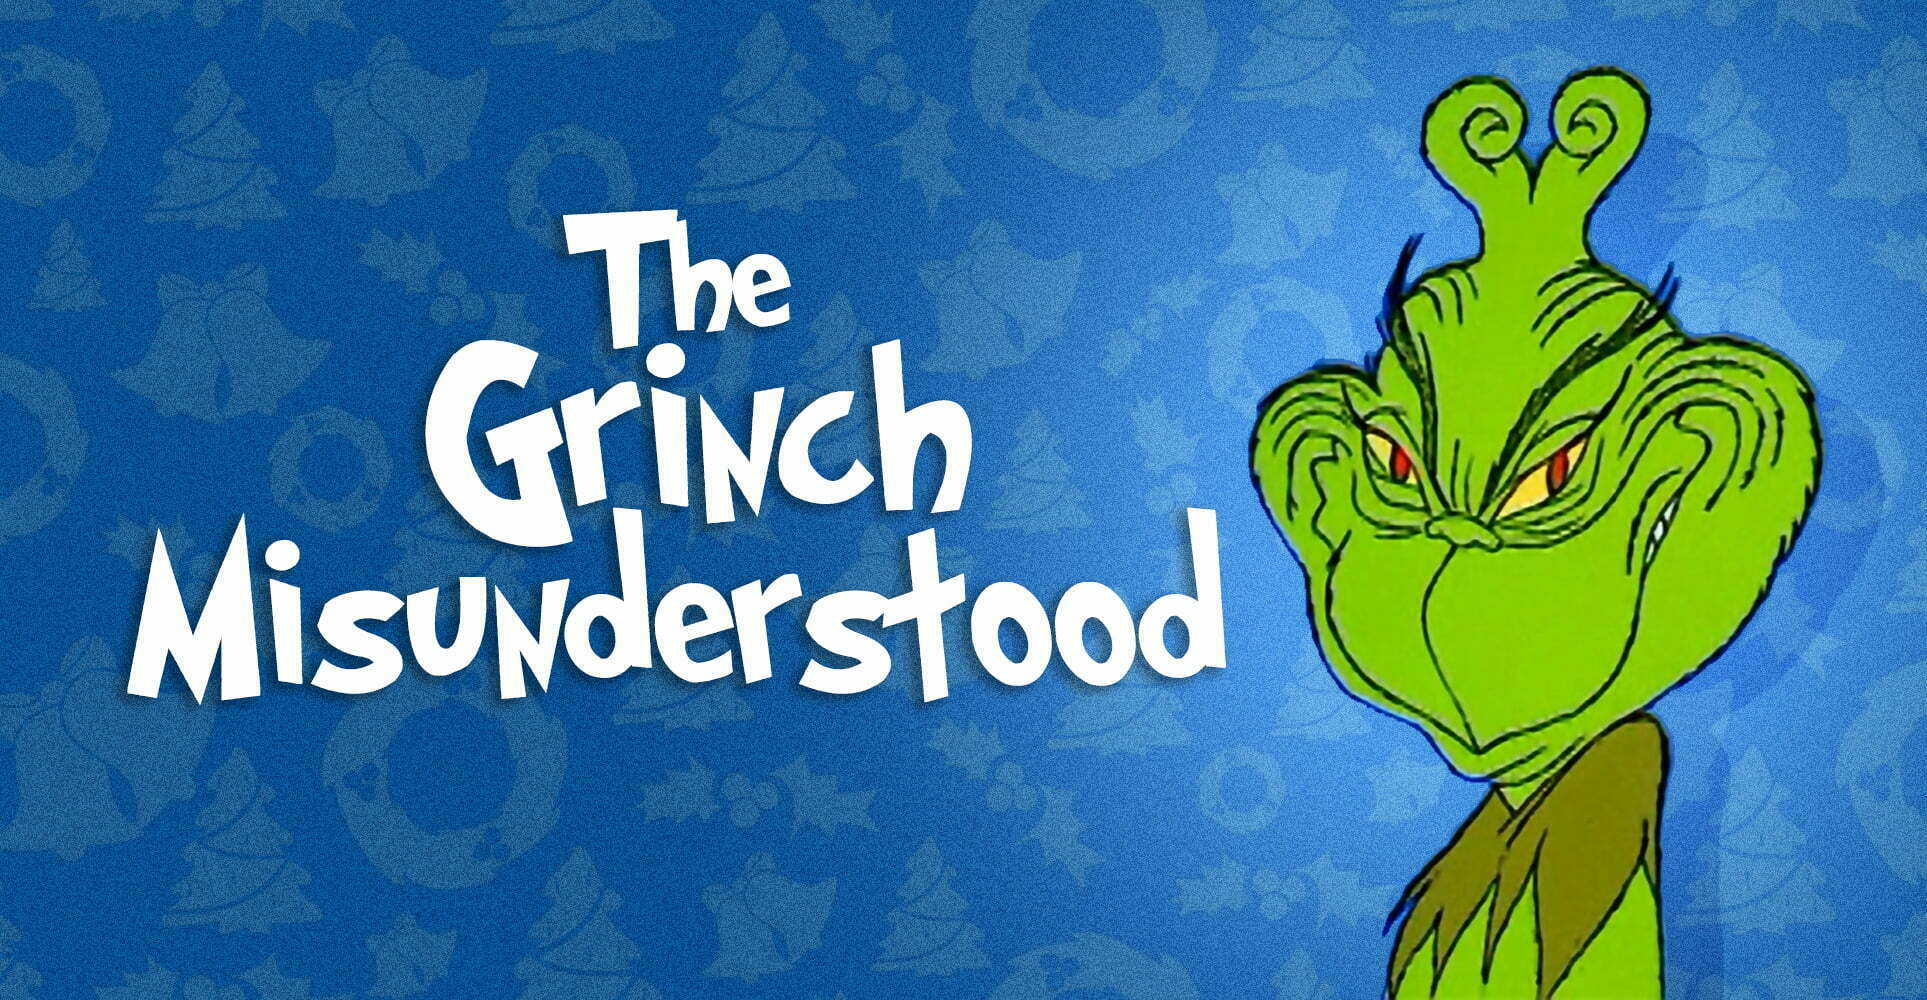 a close Cartoon image of the Grinchup of a logo